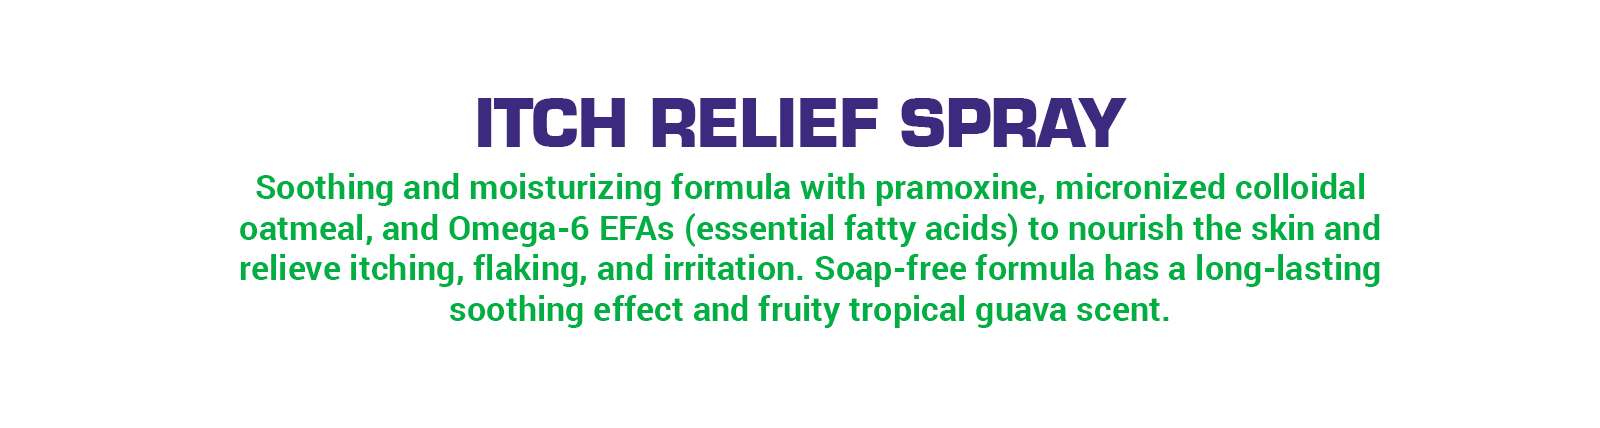 itch-relief-spray